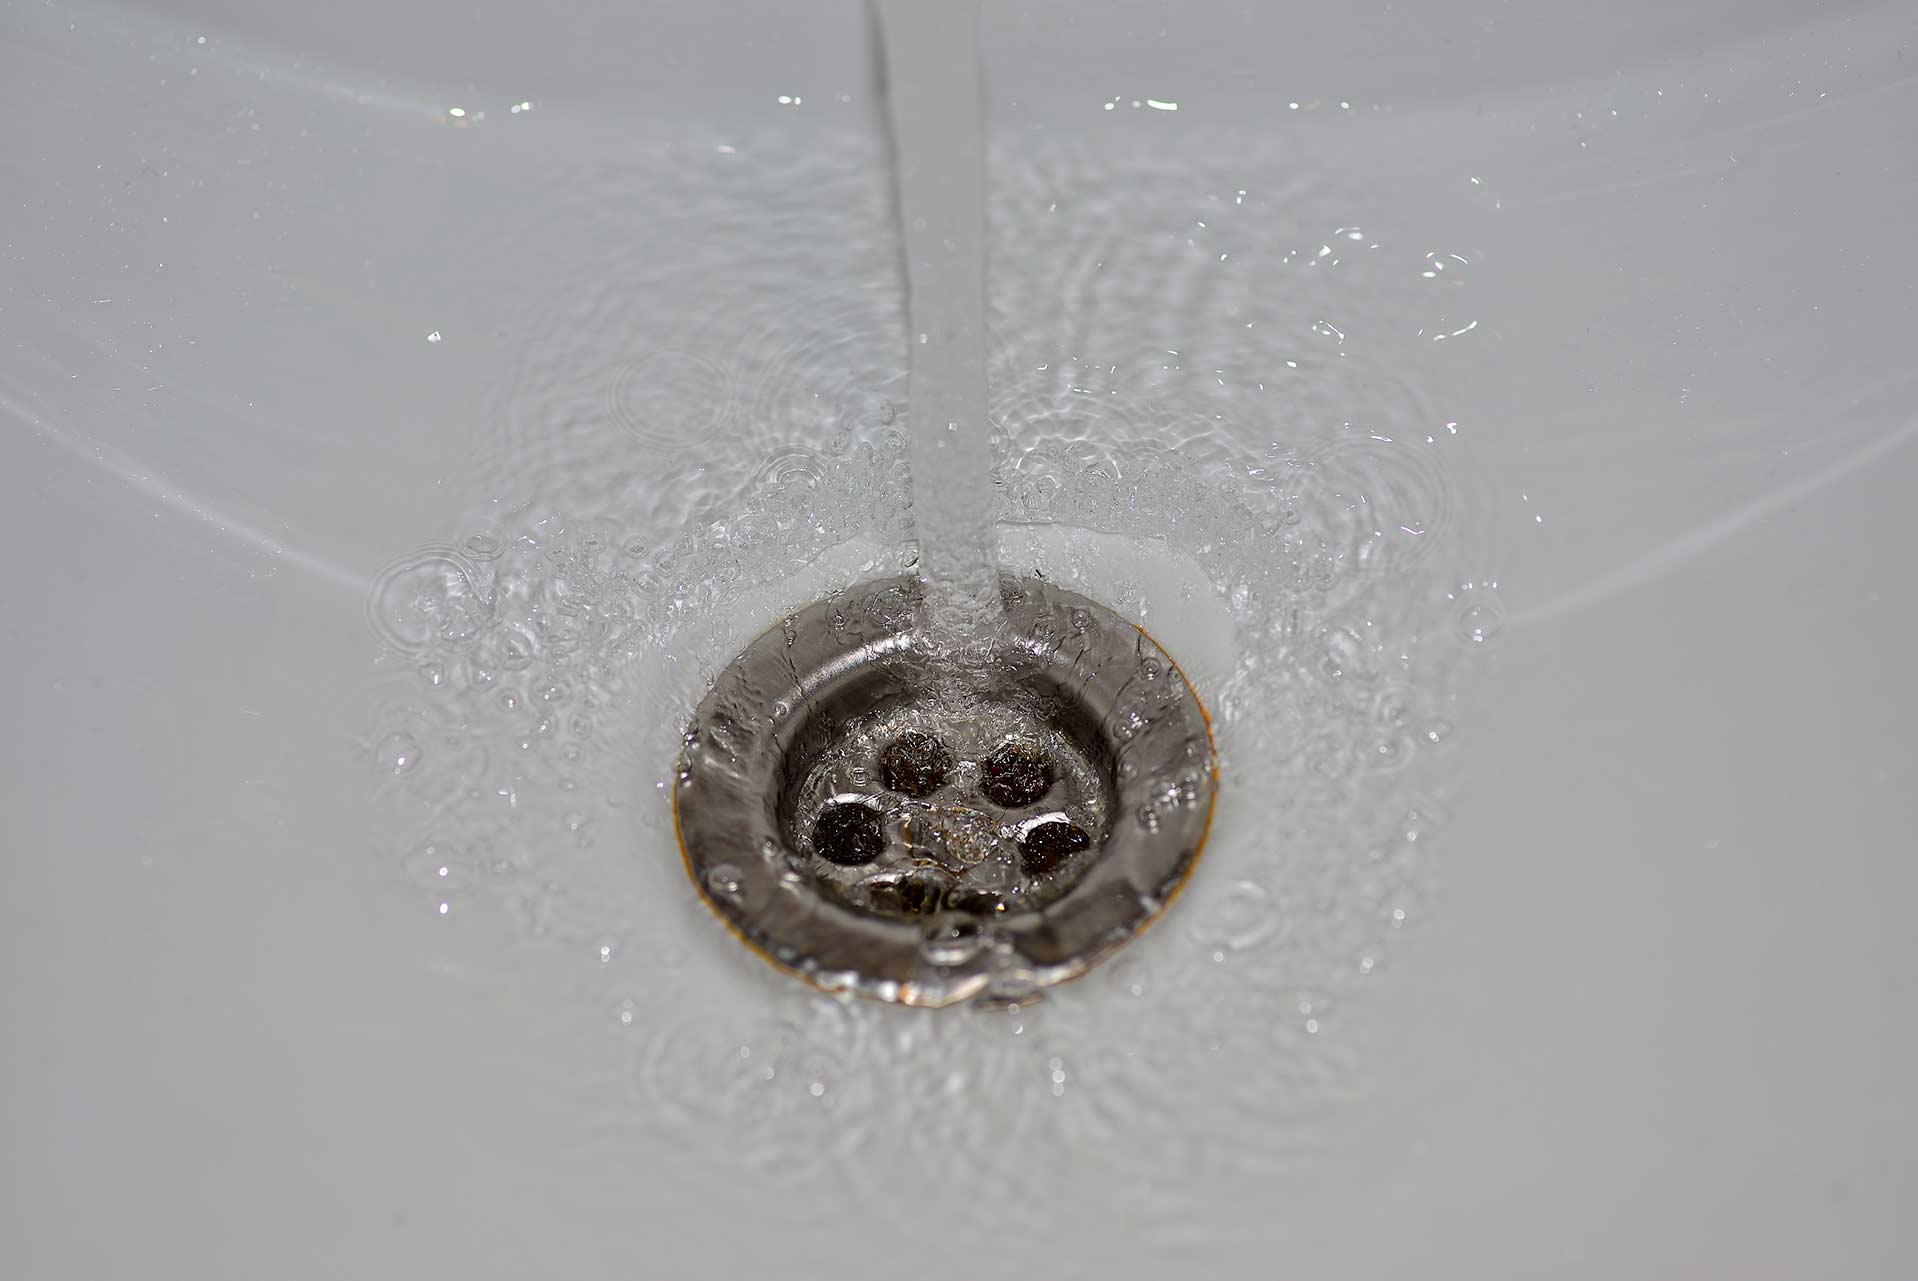 A2B Drains provides services to unblock blocked sinks and drains for properties in Alton.